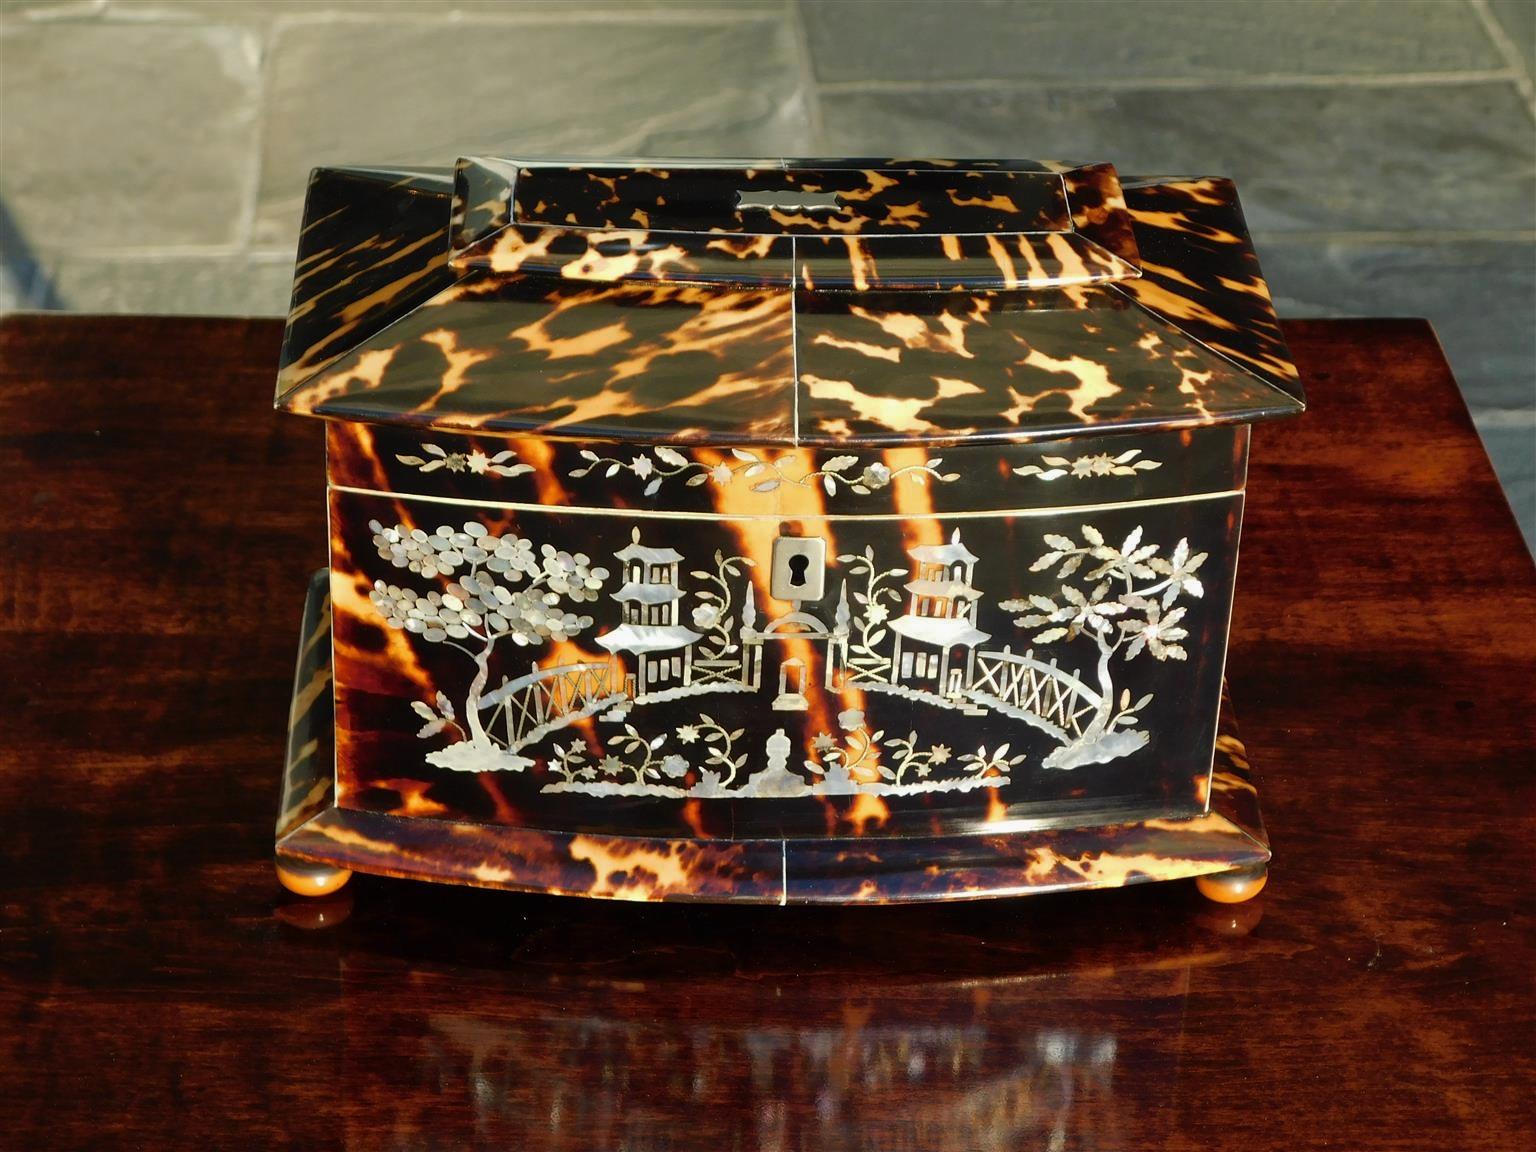 English Georgian Chinroserie bow front tortoise shell tea caddy with a hinged tiered lid, Chinese landscape mother of pearl inlays with flanking pagodas, fences, & foliage trees, central paktong plaque and escutcheon, bone fitted interior border